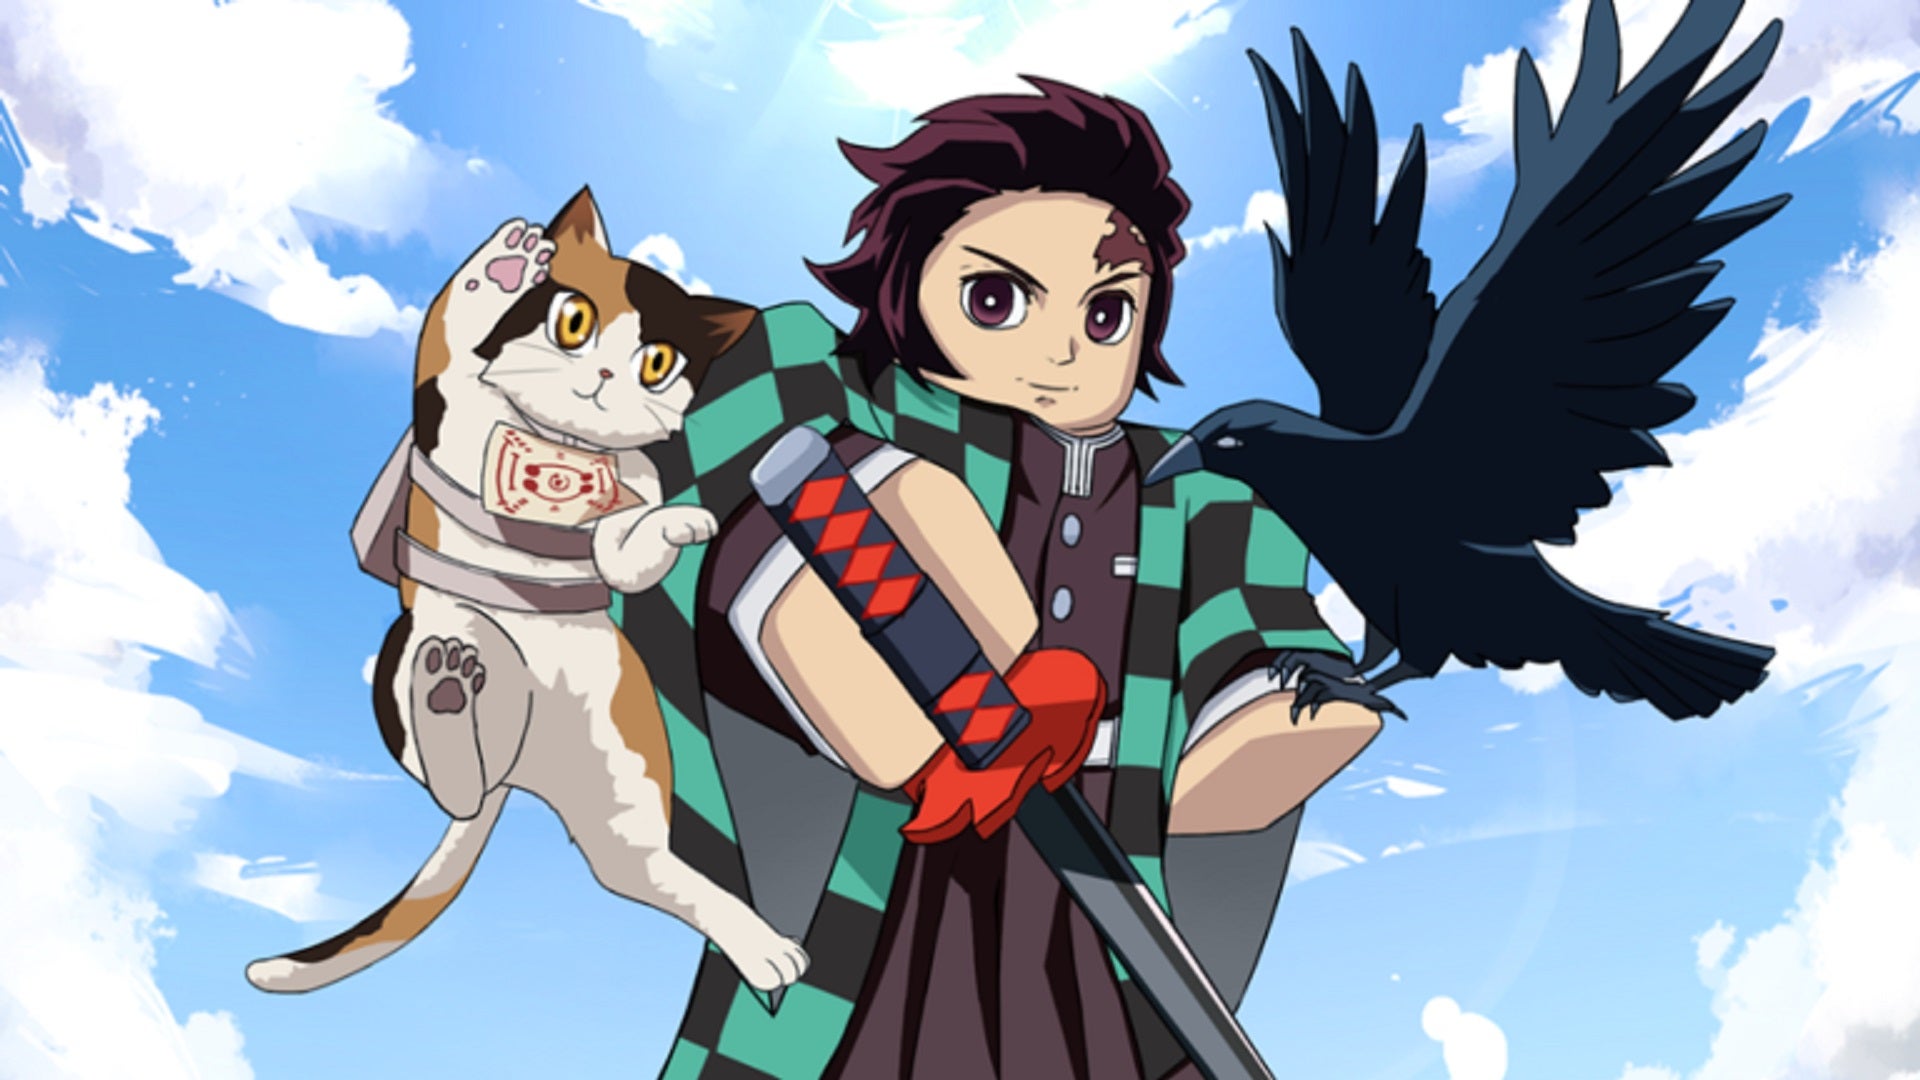 A Roblox header image for Demon Soul Simulator shows an anime character accompanied by a cat and a raven.